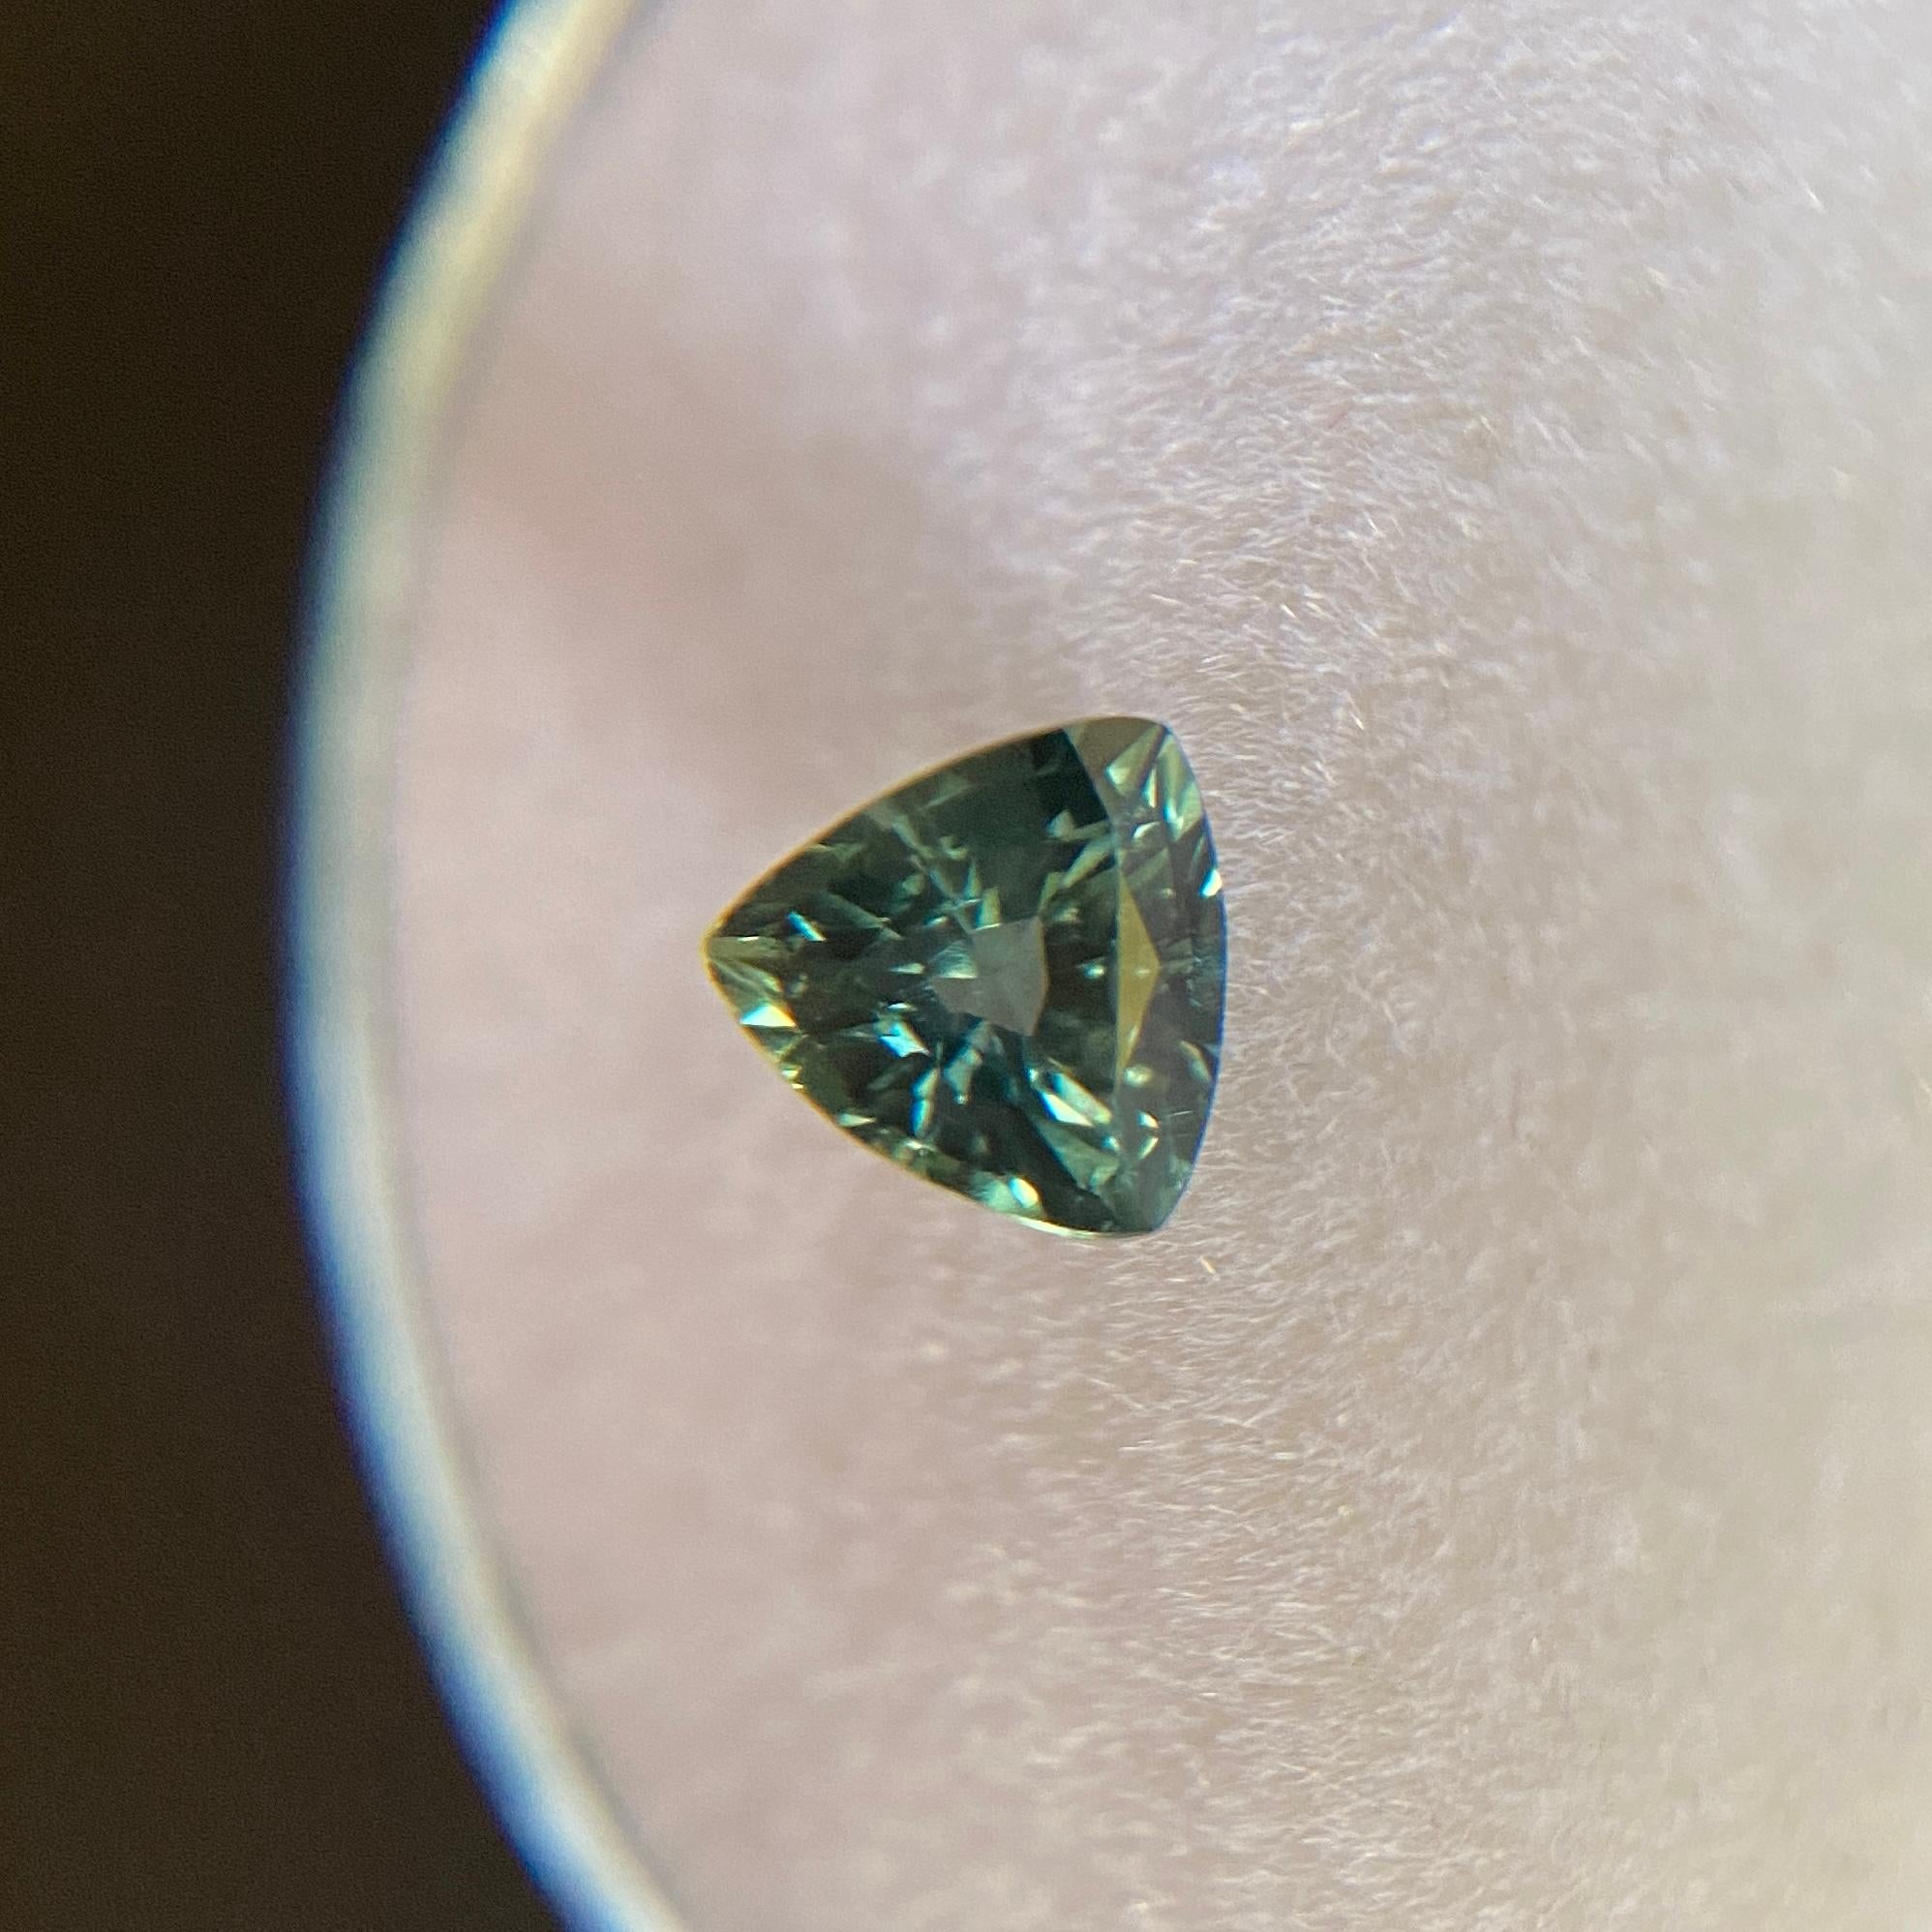 Natural Deep Green Blue Australian Sapphire Gemstone.

0.67 Carat with a beautiful deep greenish blue colour and very good clarity, a clean stone with only some small natural inclusions visible when looking closely. No breaks or cracks.

Also has an